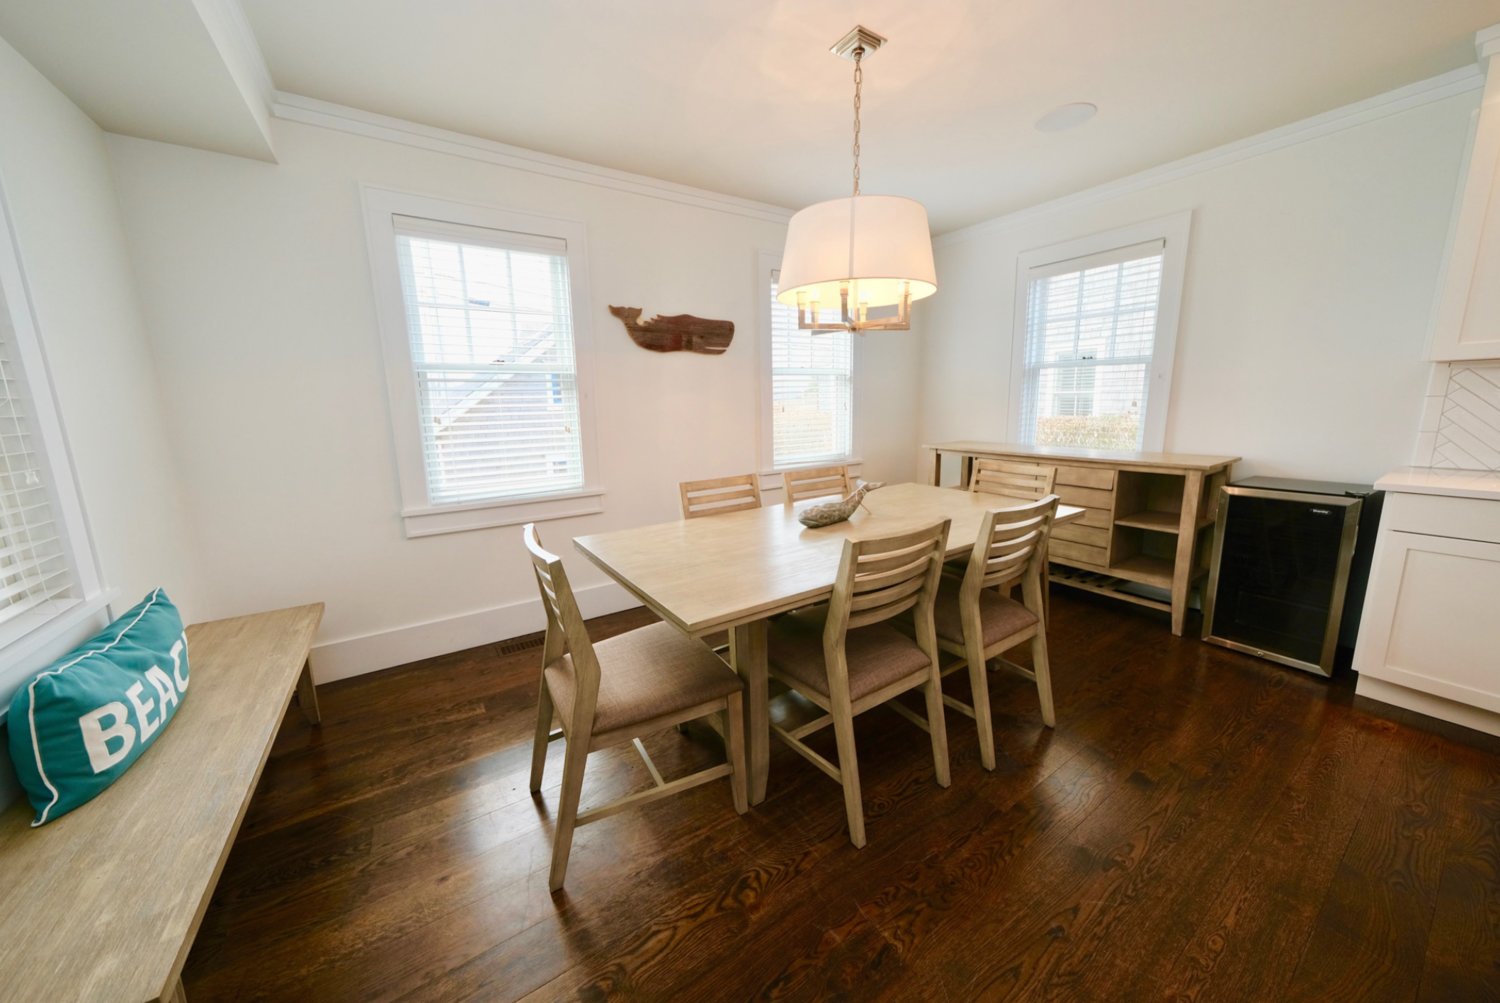 The dining area is the perfect size for a family dinner, or a quiet evening sharing a meal with a few friends.